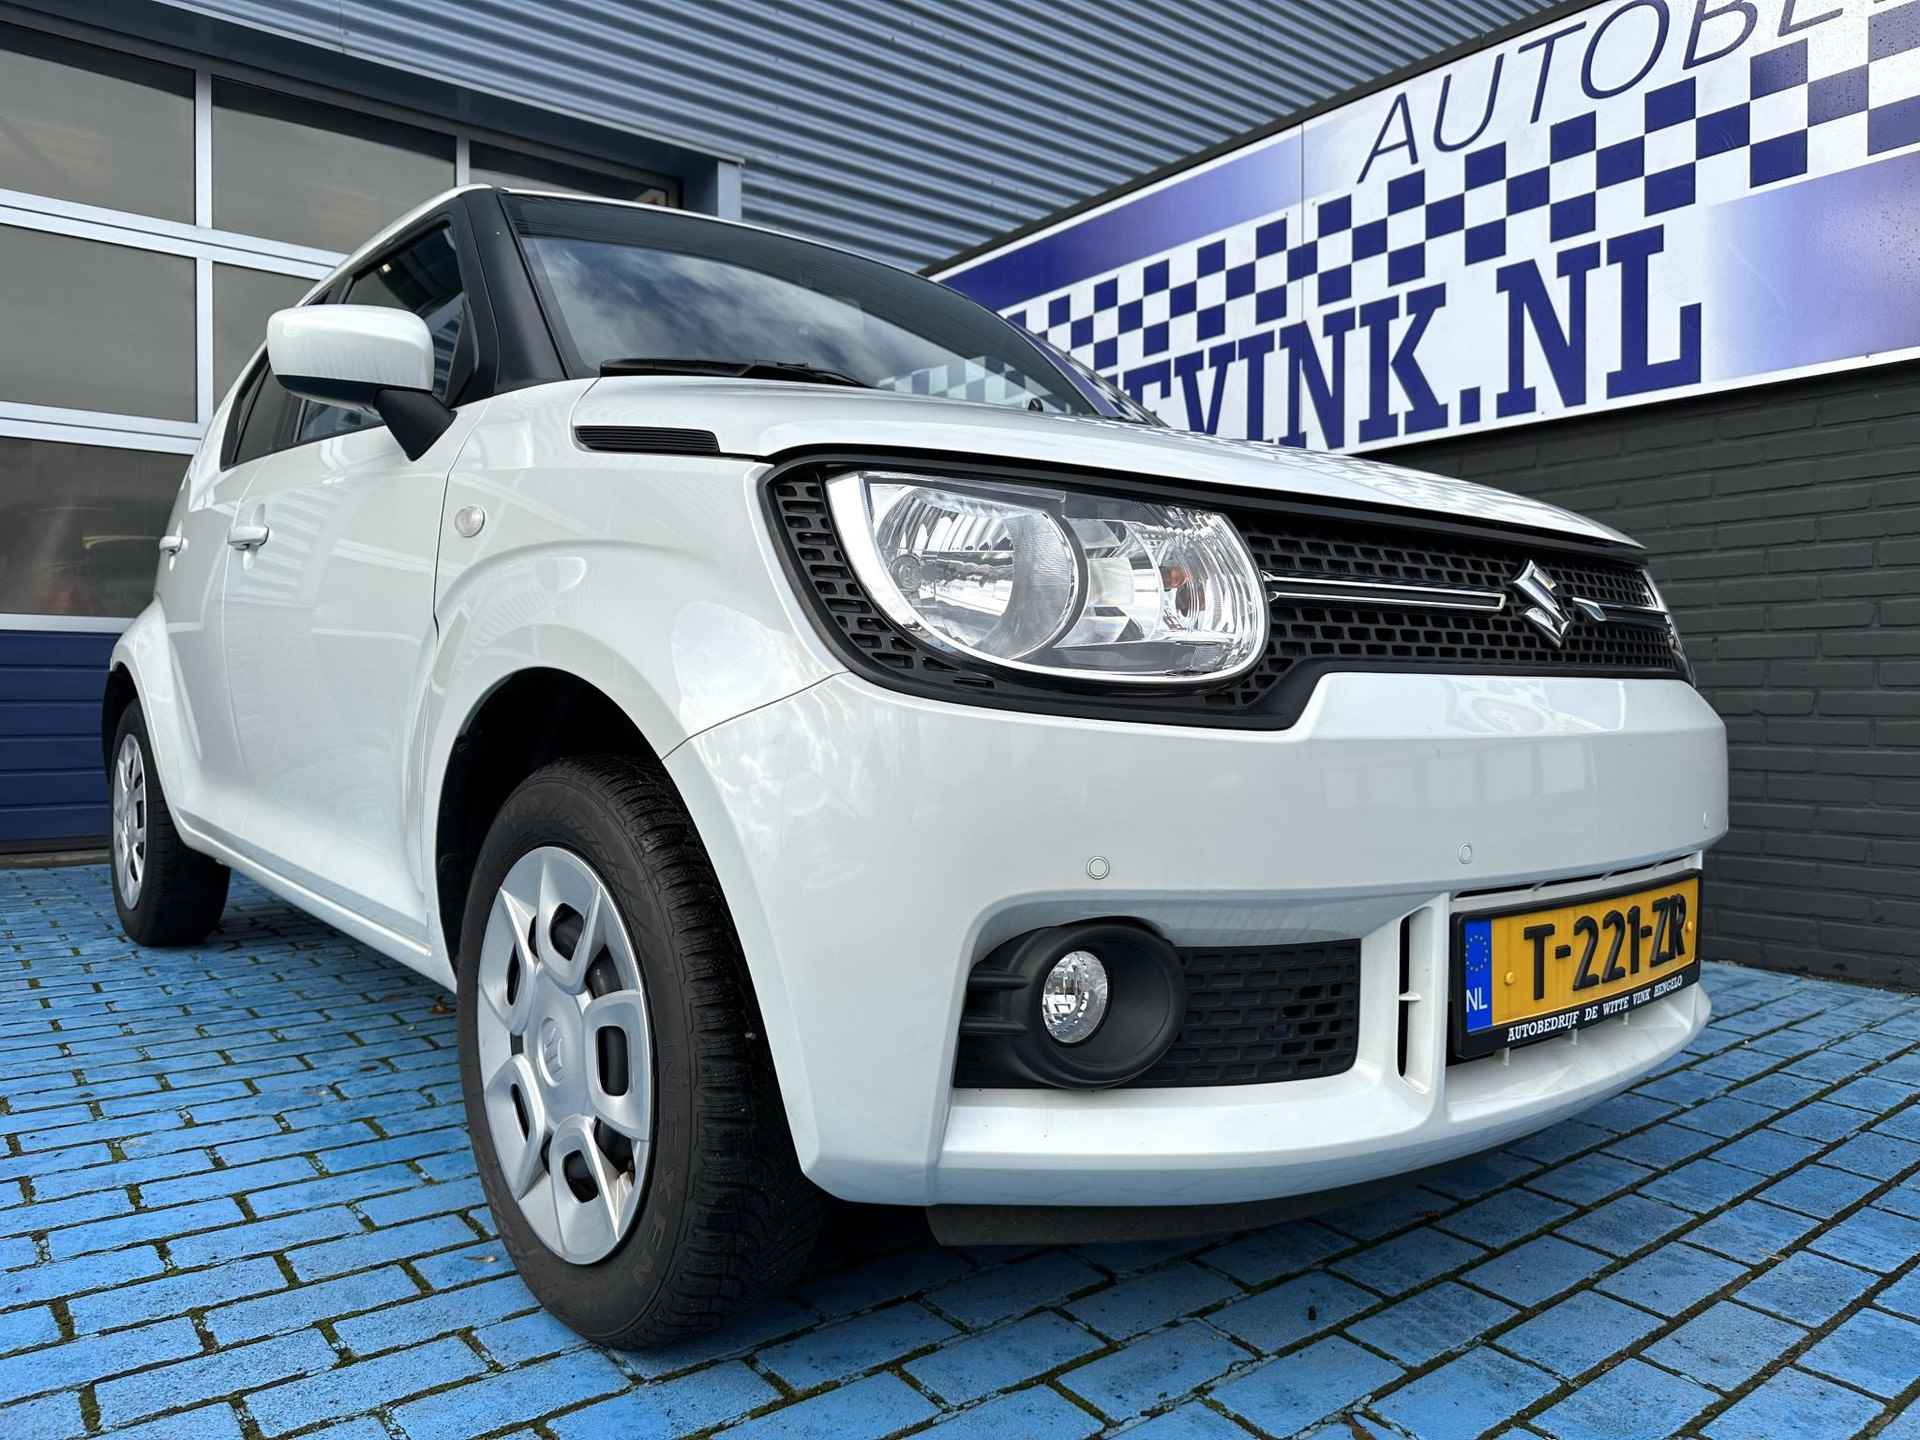 Suzuki Ignis 1.2 Comfort PDC V+A HOGE INSTAP AIRCO PDC BOVAG - 6/30